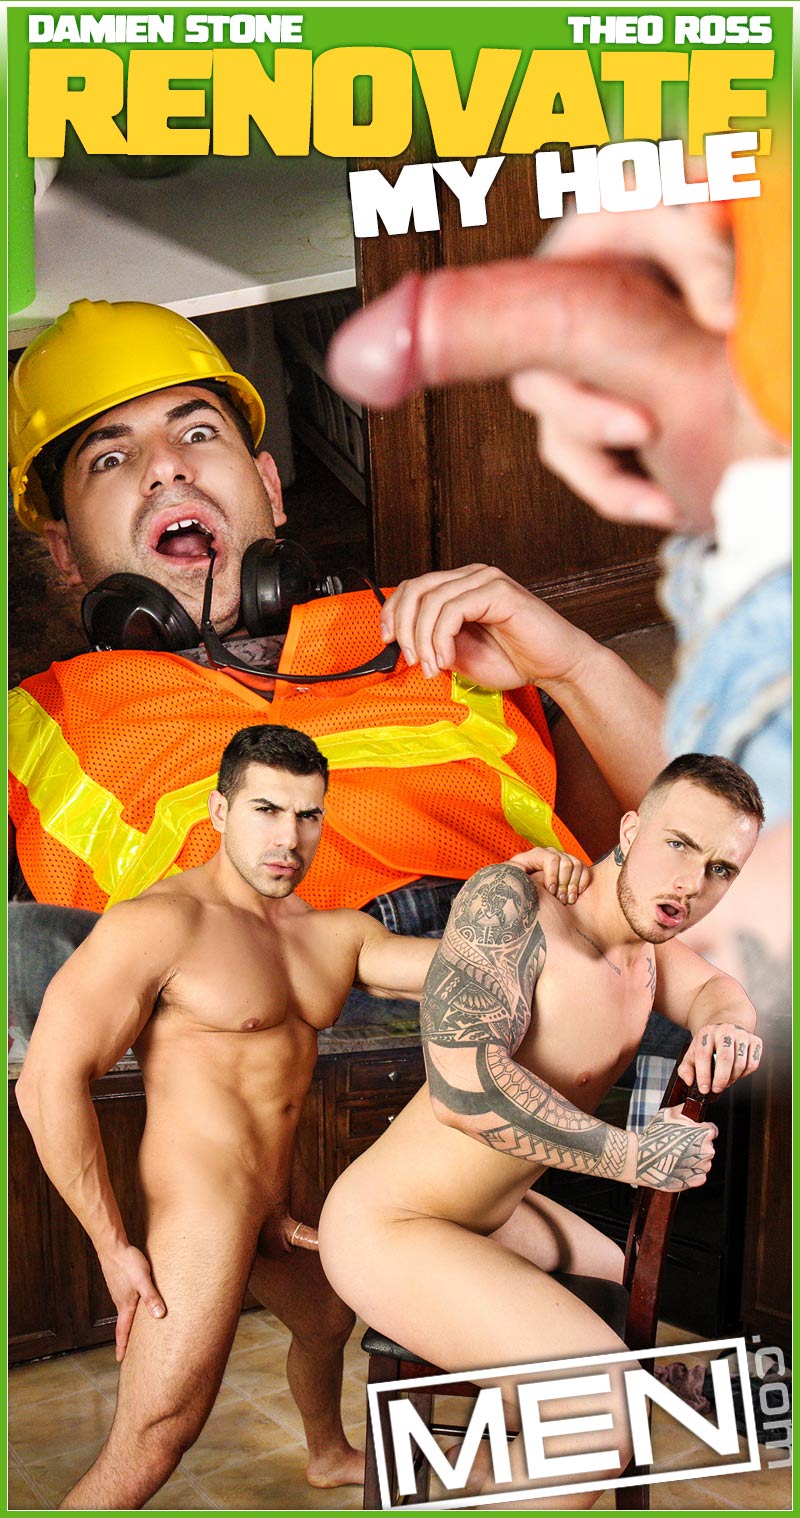 Renovate My Hole (Damien Stone Fucks Theo Ross) at Str8 To Gay